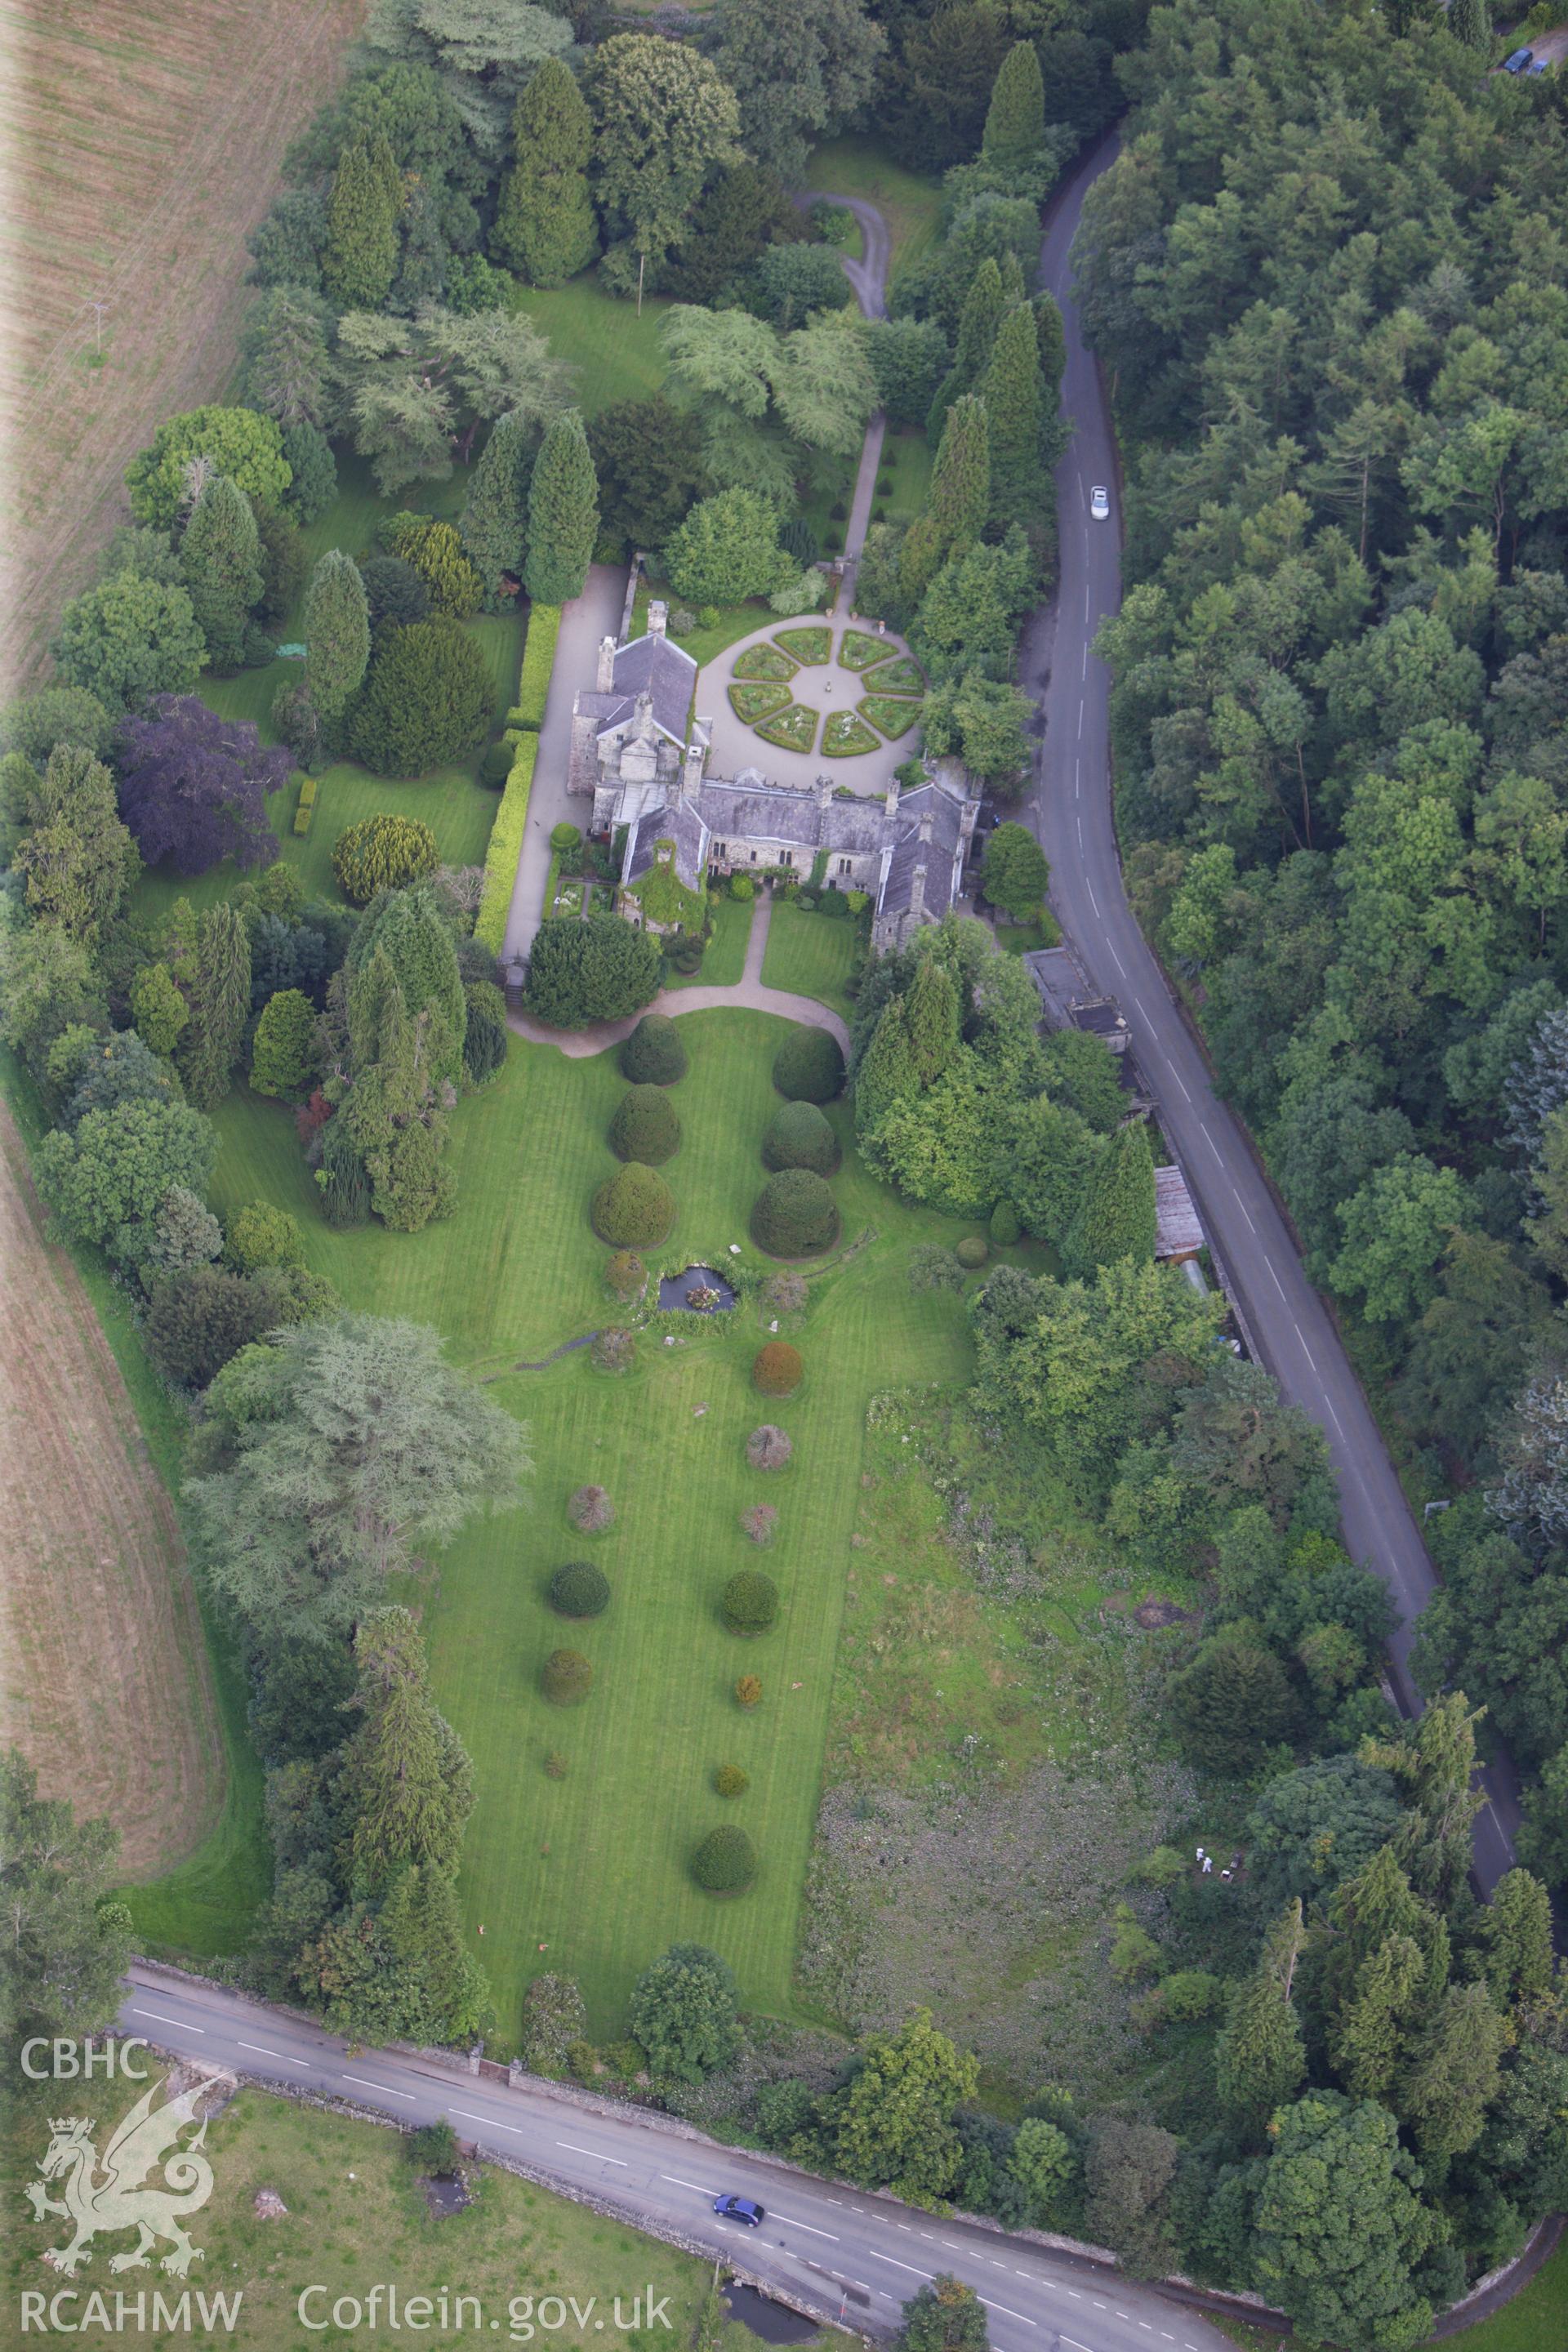 RCAHMW colour oblique aerial photograph of Gwydir Castle. Taken on 06 August 2009 by Toby Driver